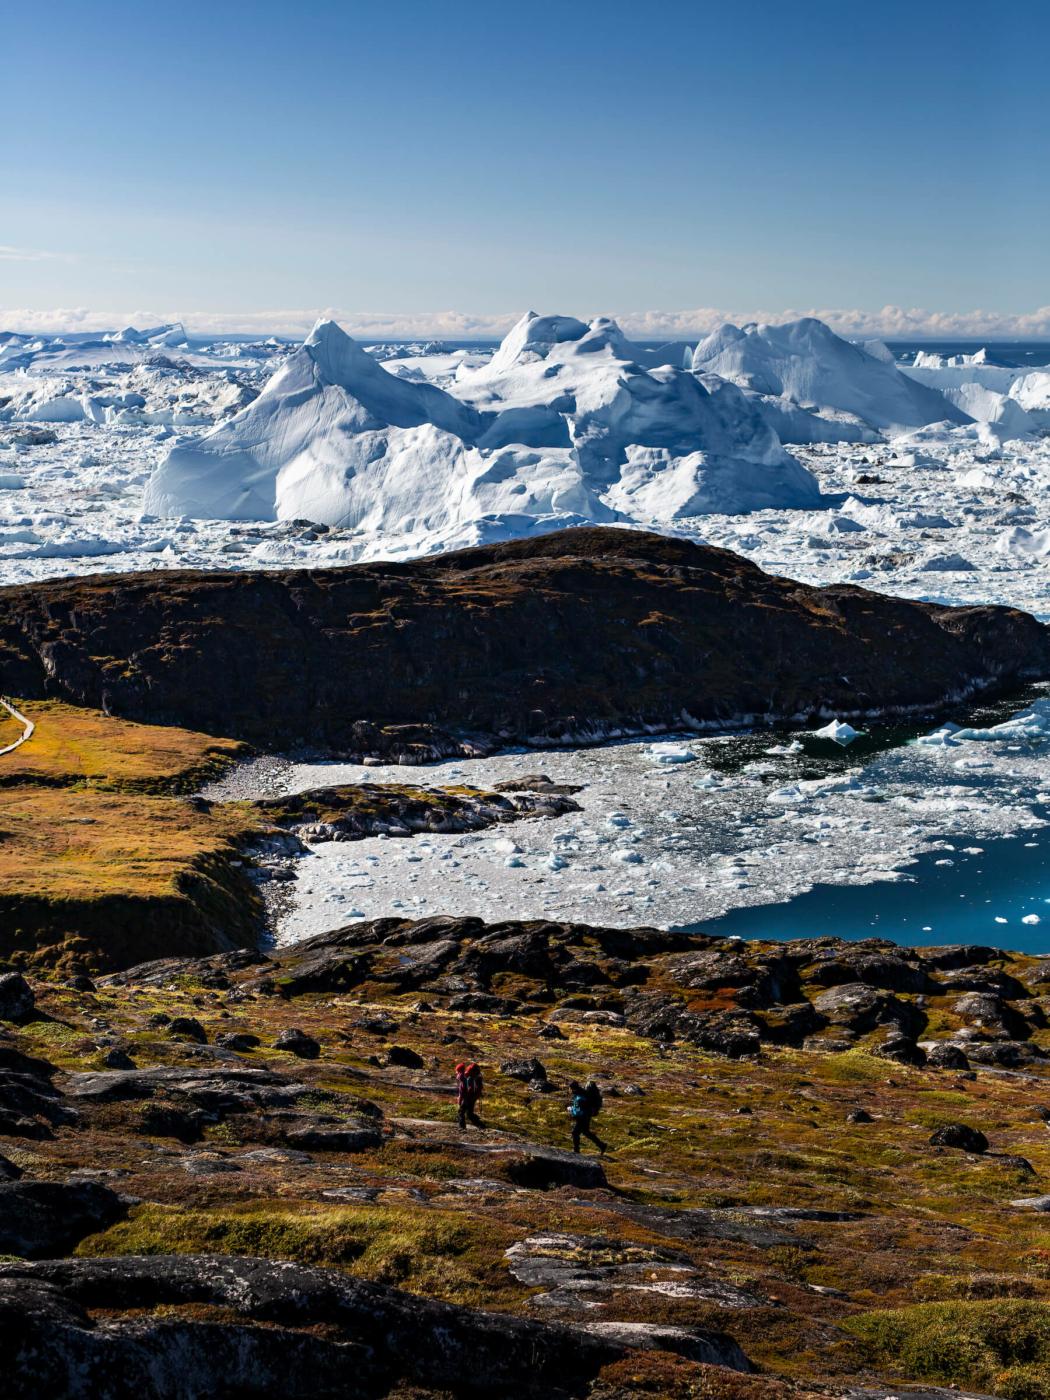 Hikers at the Ilulissat Icefjord. Photo-Aningaaq R Carlsen - Visit Greenland